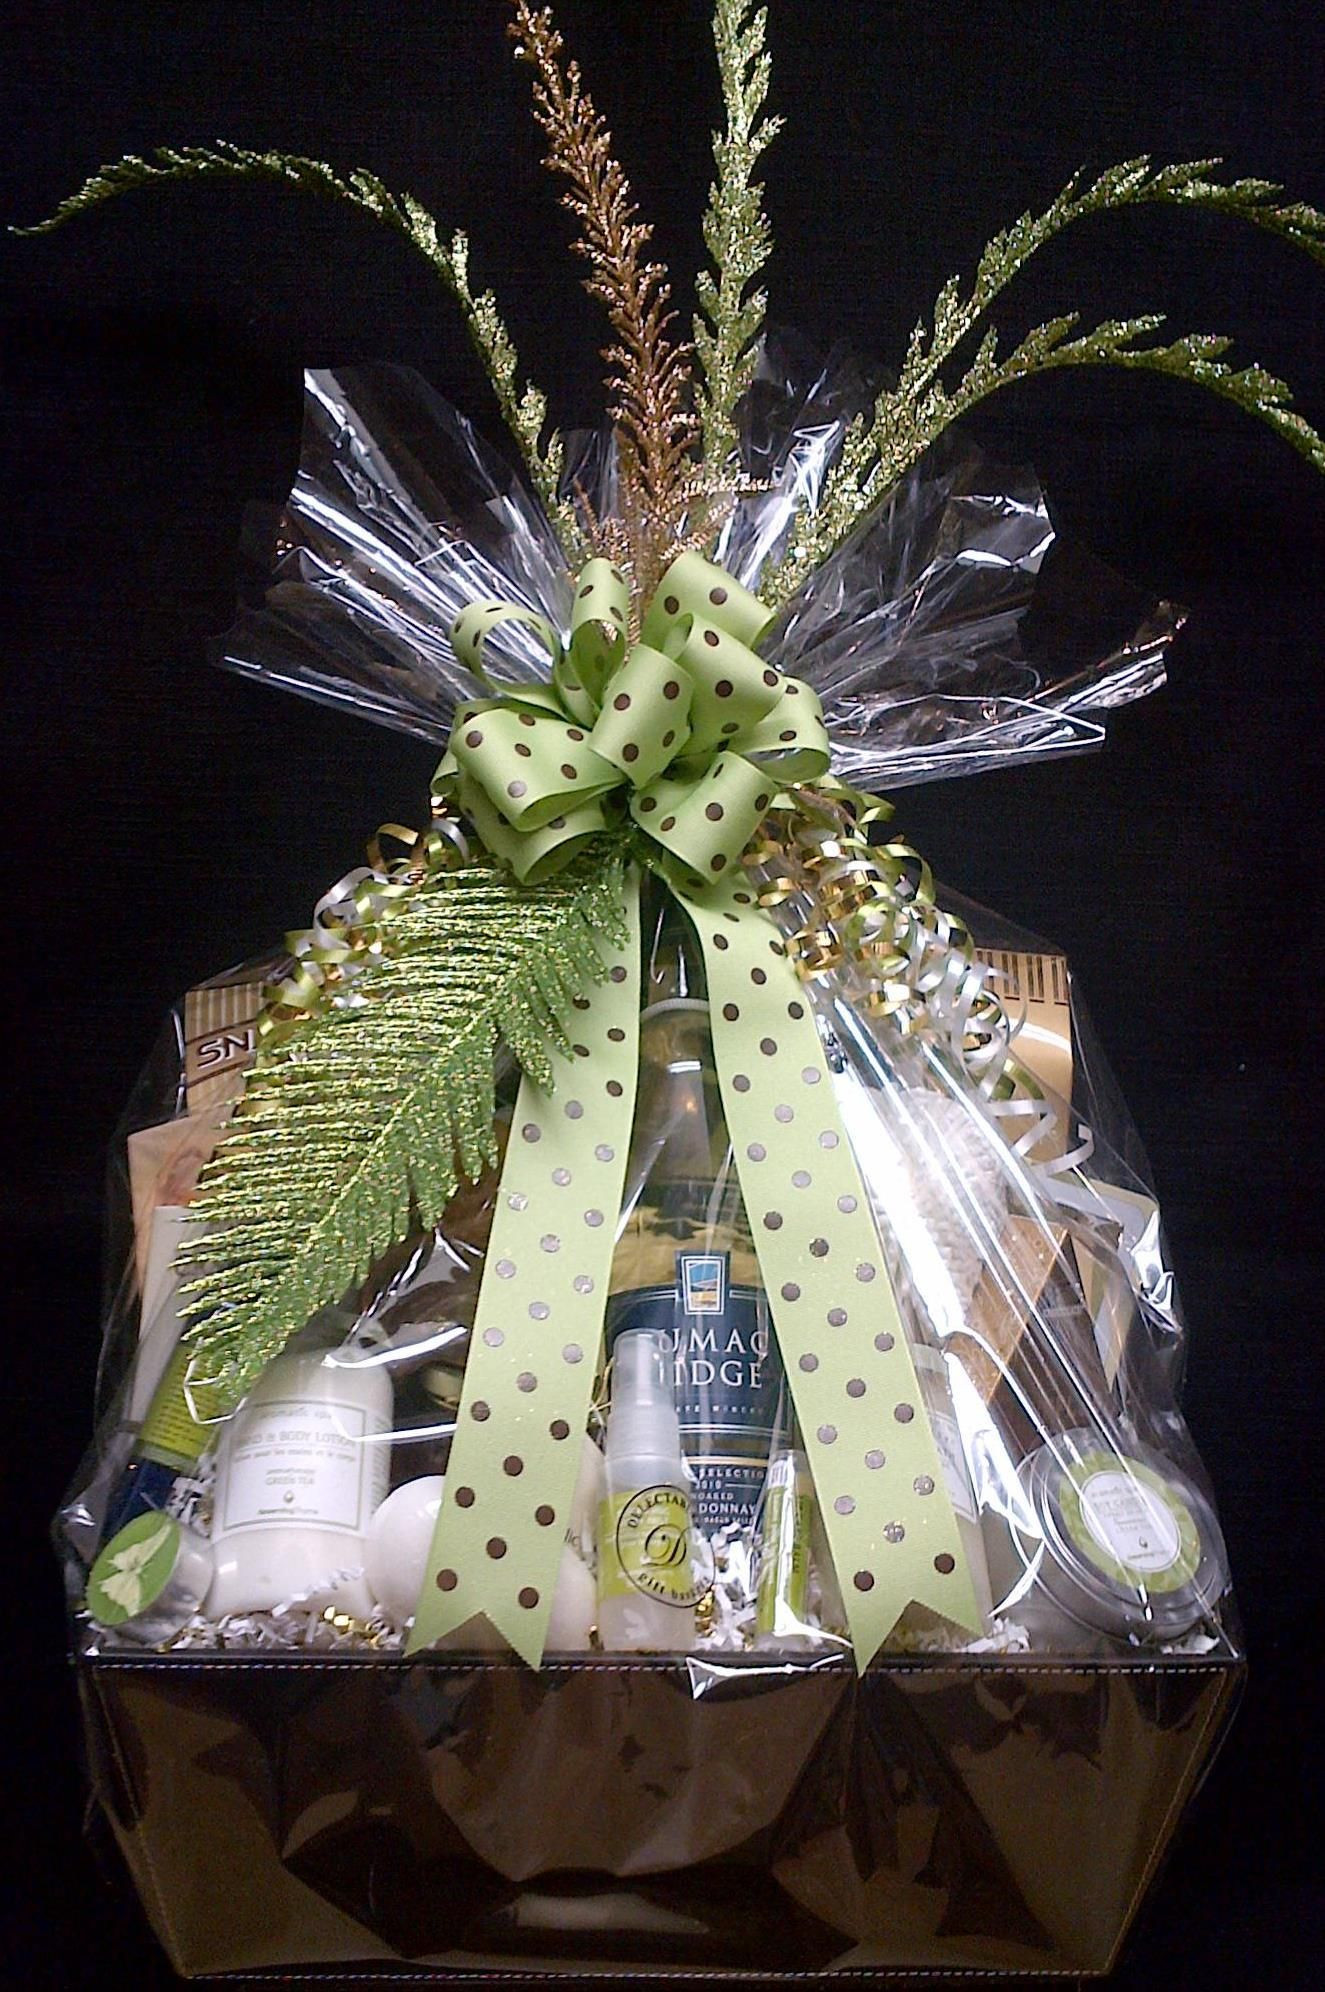 Gift Basket Wrapping Ideas
 The 25 best Wrapping t baskets ideas on Pinterest